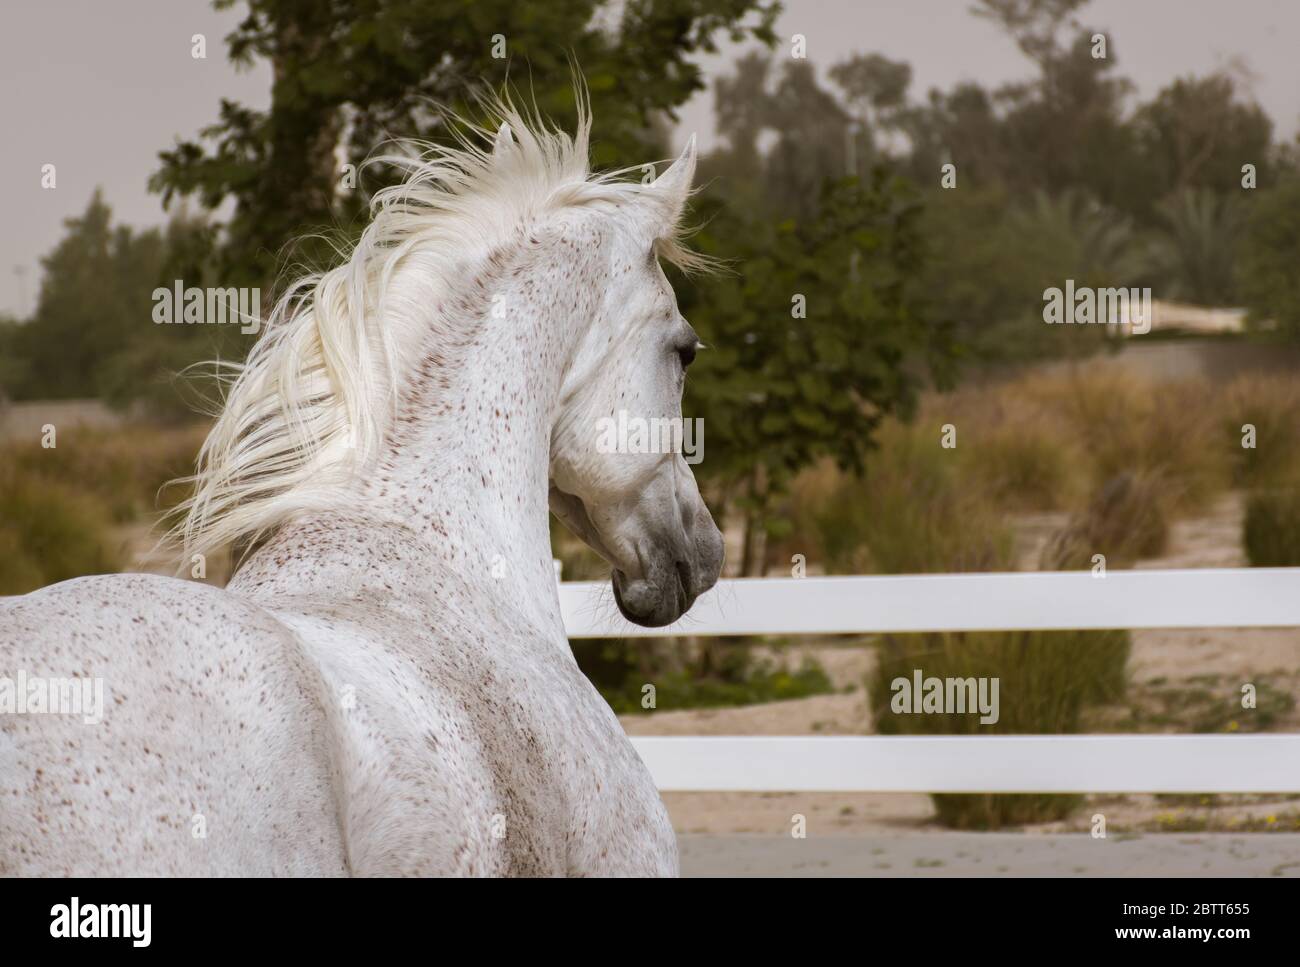 A view of Arabian white horse from the side and back facing inside the paddock training area of Bait Al Arab, Kuwait Stock Photo